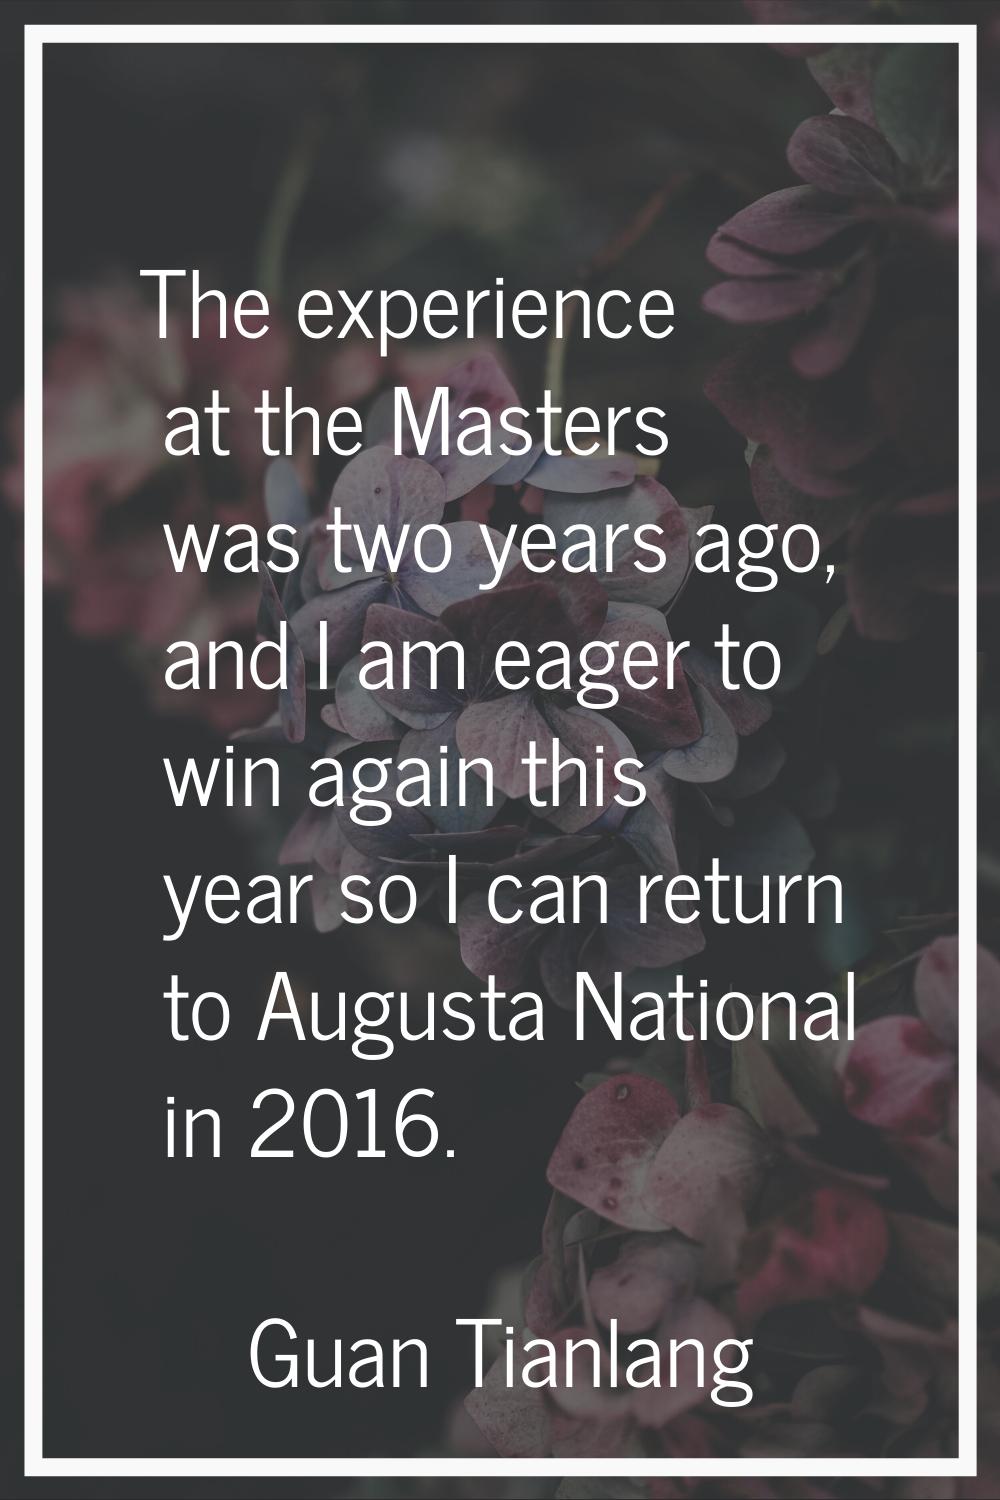 The experience at the Masters was two years ago, and I am eager to win again this year so I can ret